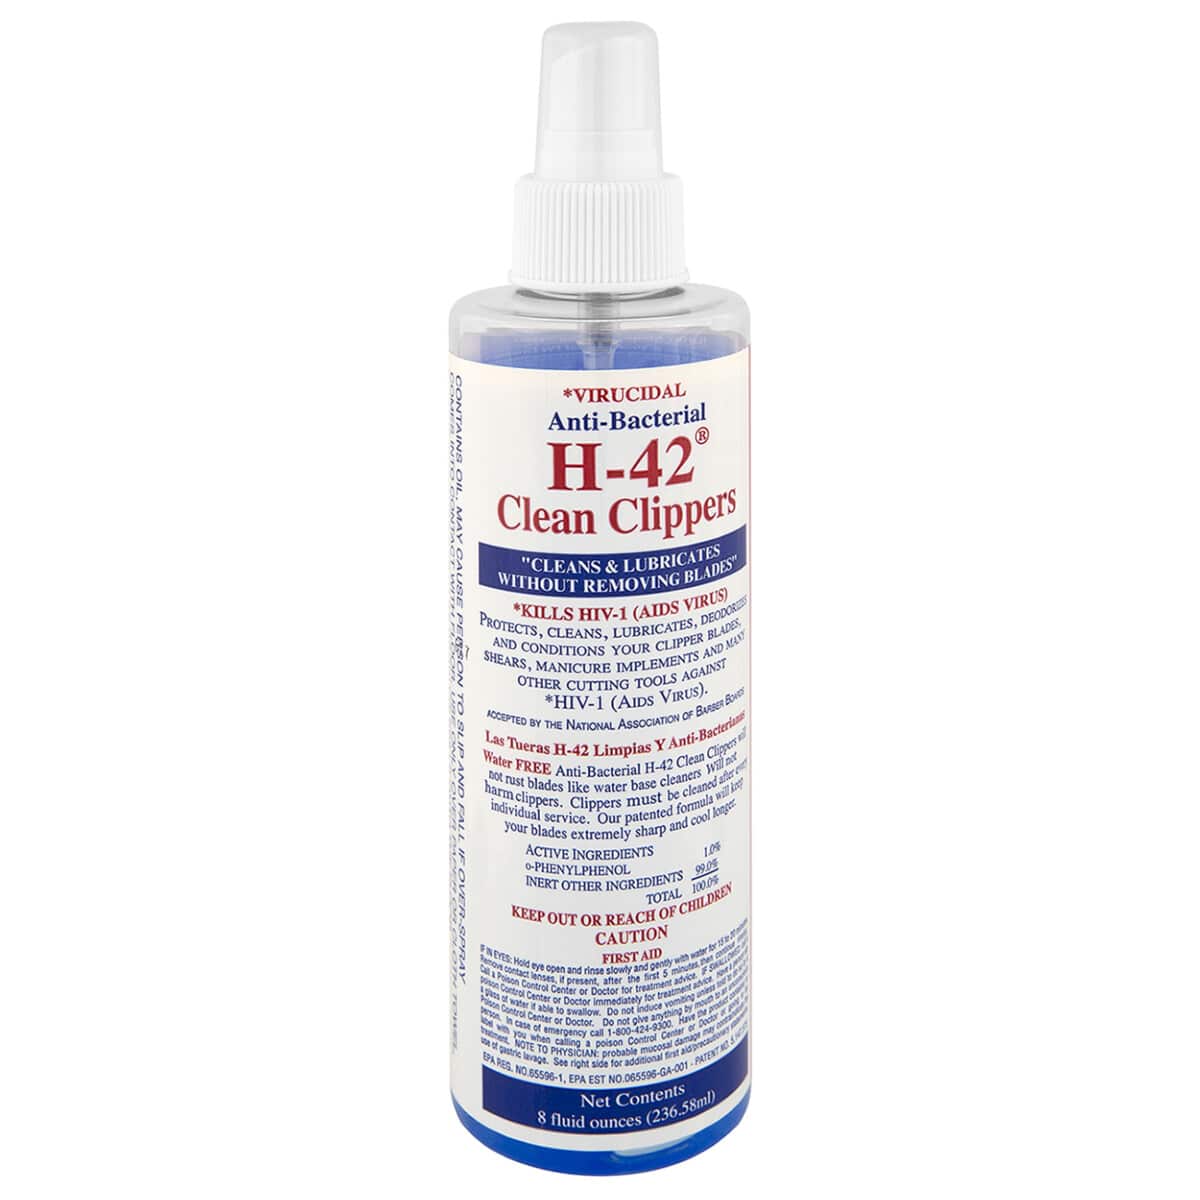 Wahl Professional Hygienic Spray. Disinfectant / Cleaner 250ml :  : Health & Personal Care